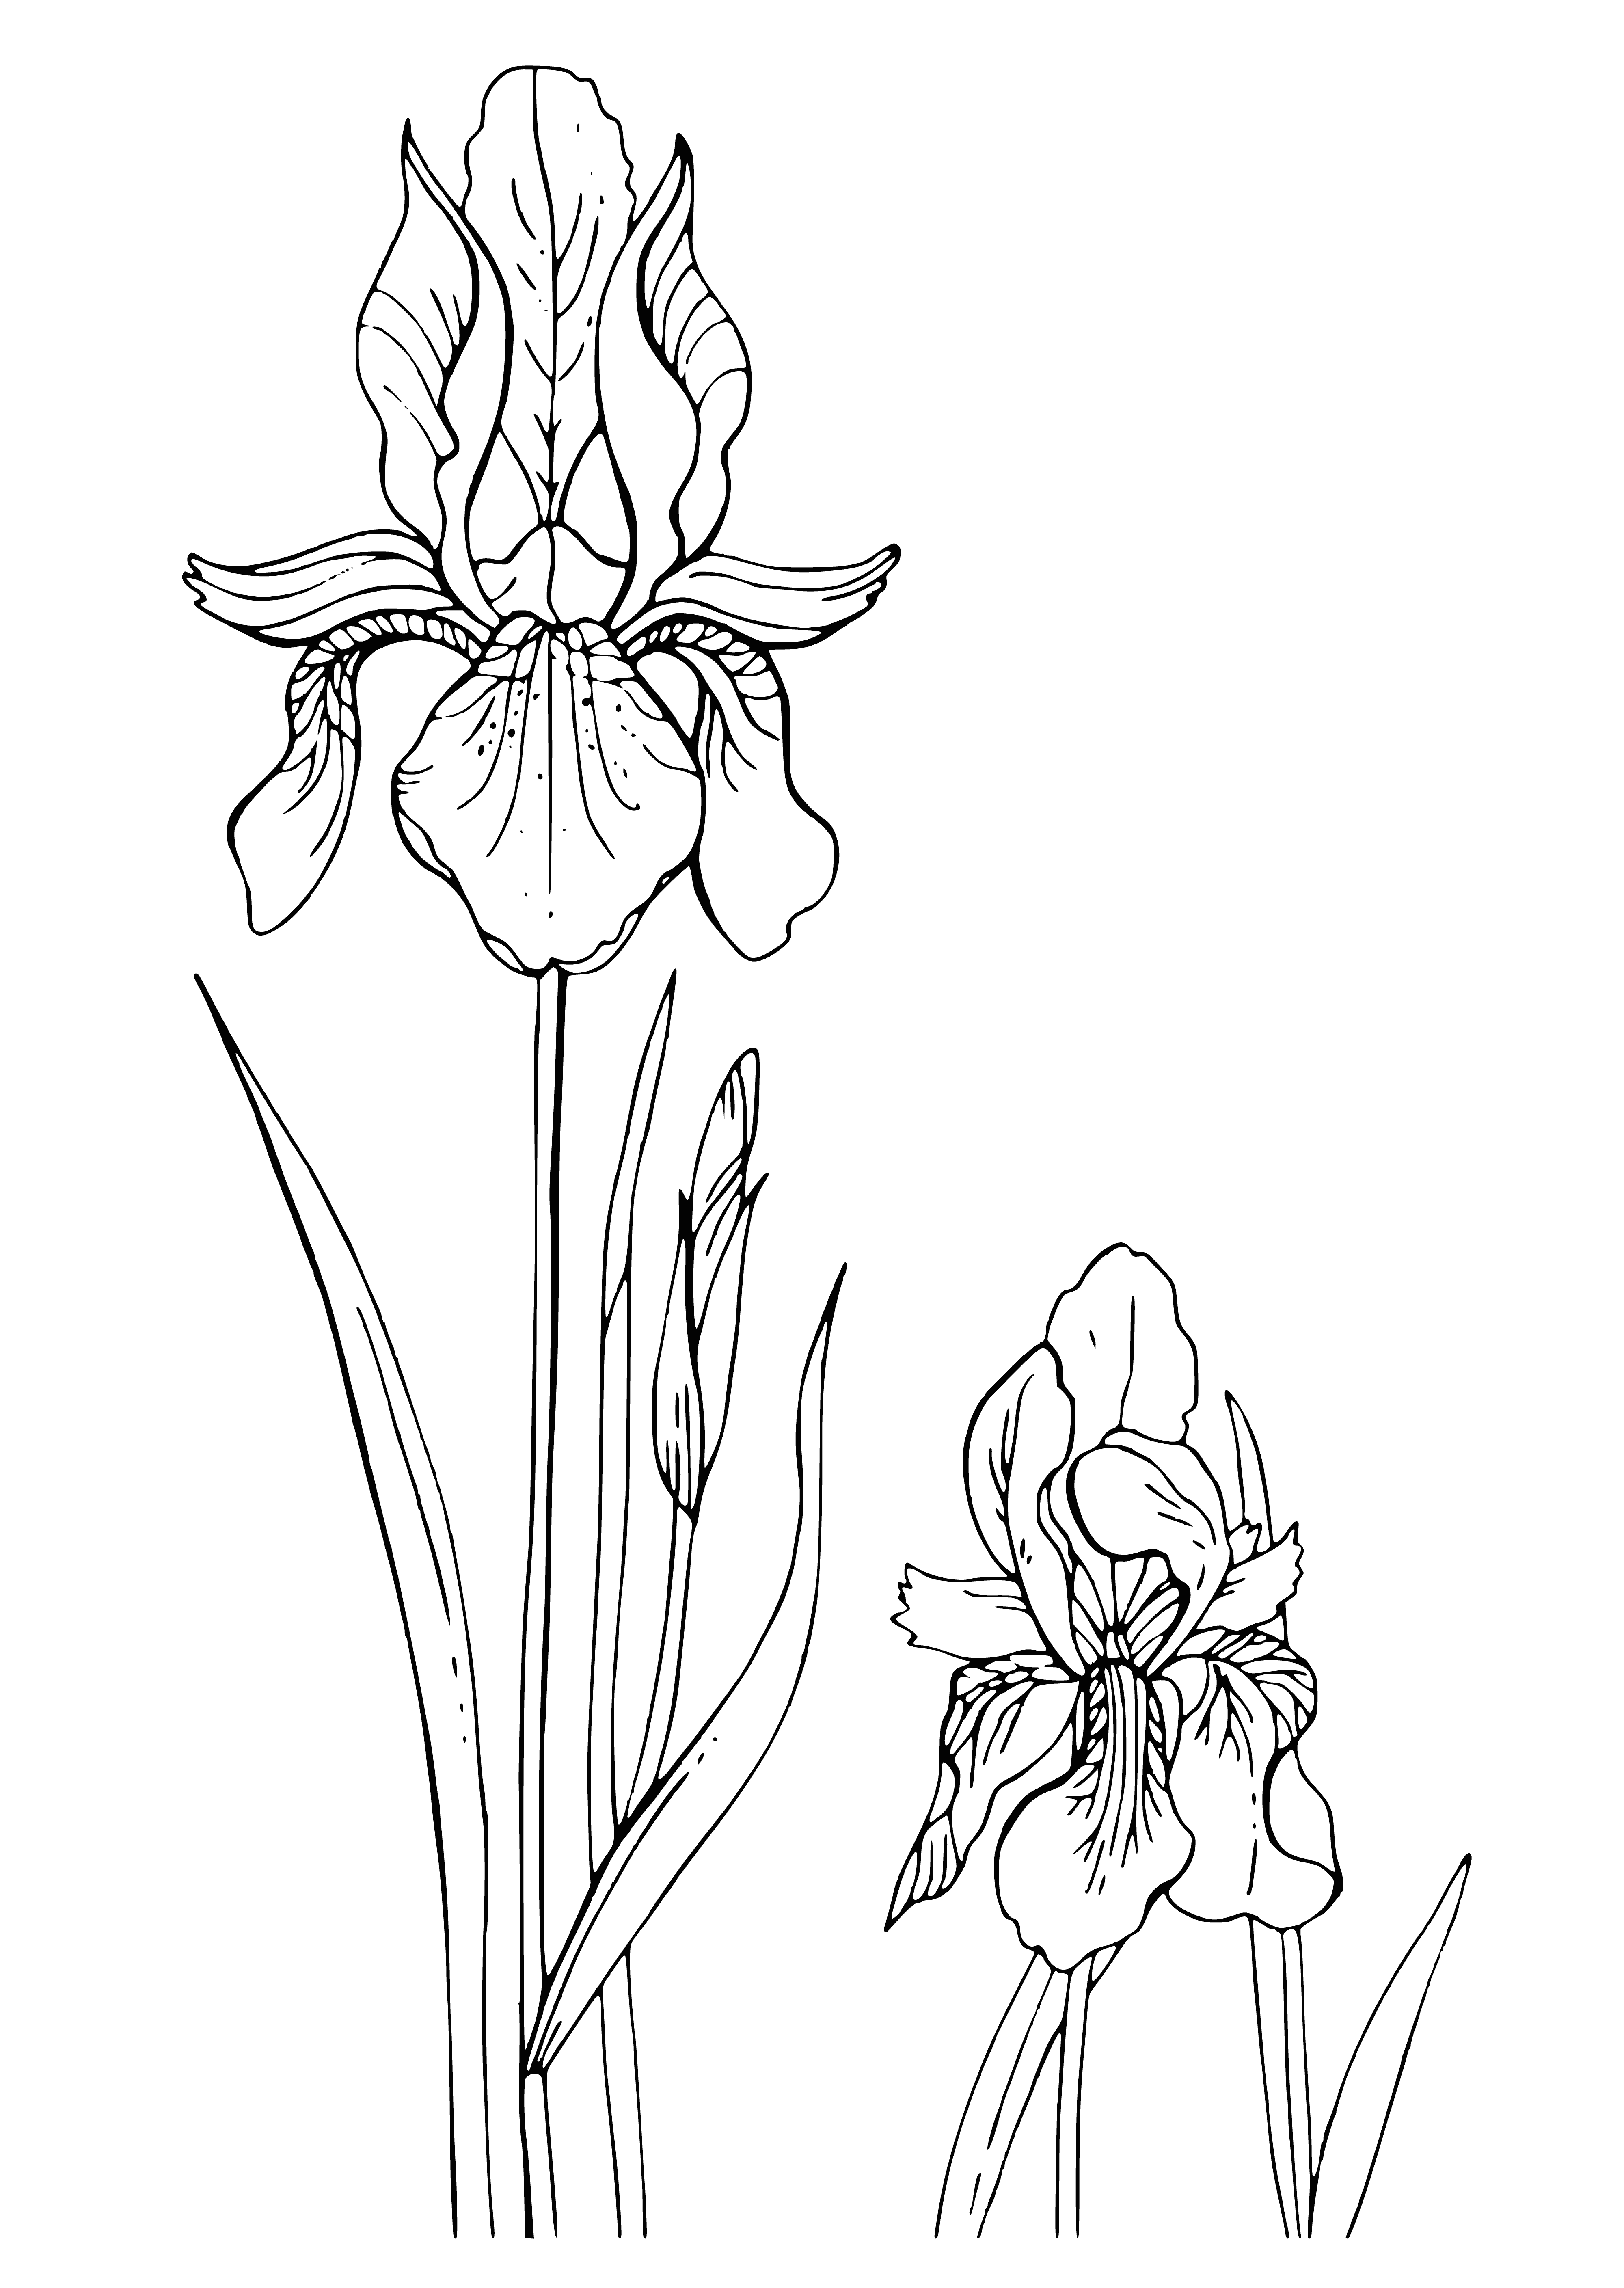 coloring page: 3 purple irises w/ yellow hightlights, deep purple colors and long thin green stems w/ small leaves.